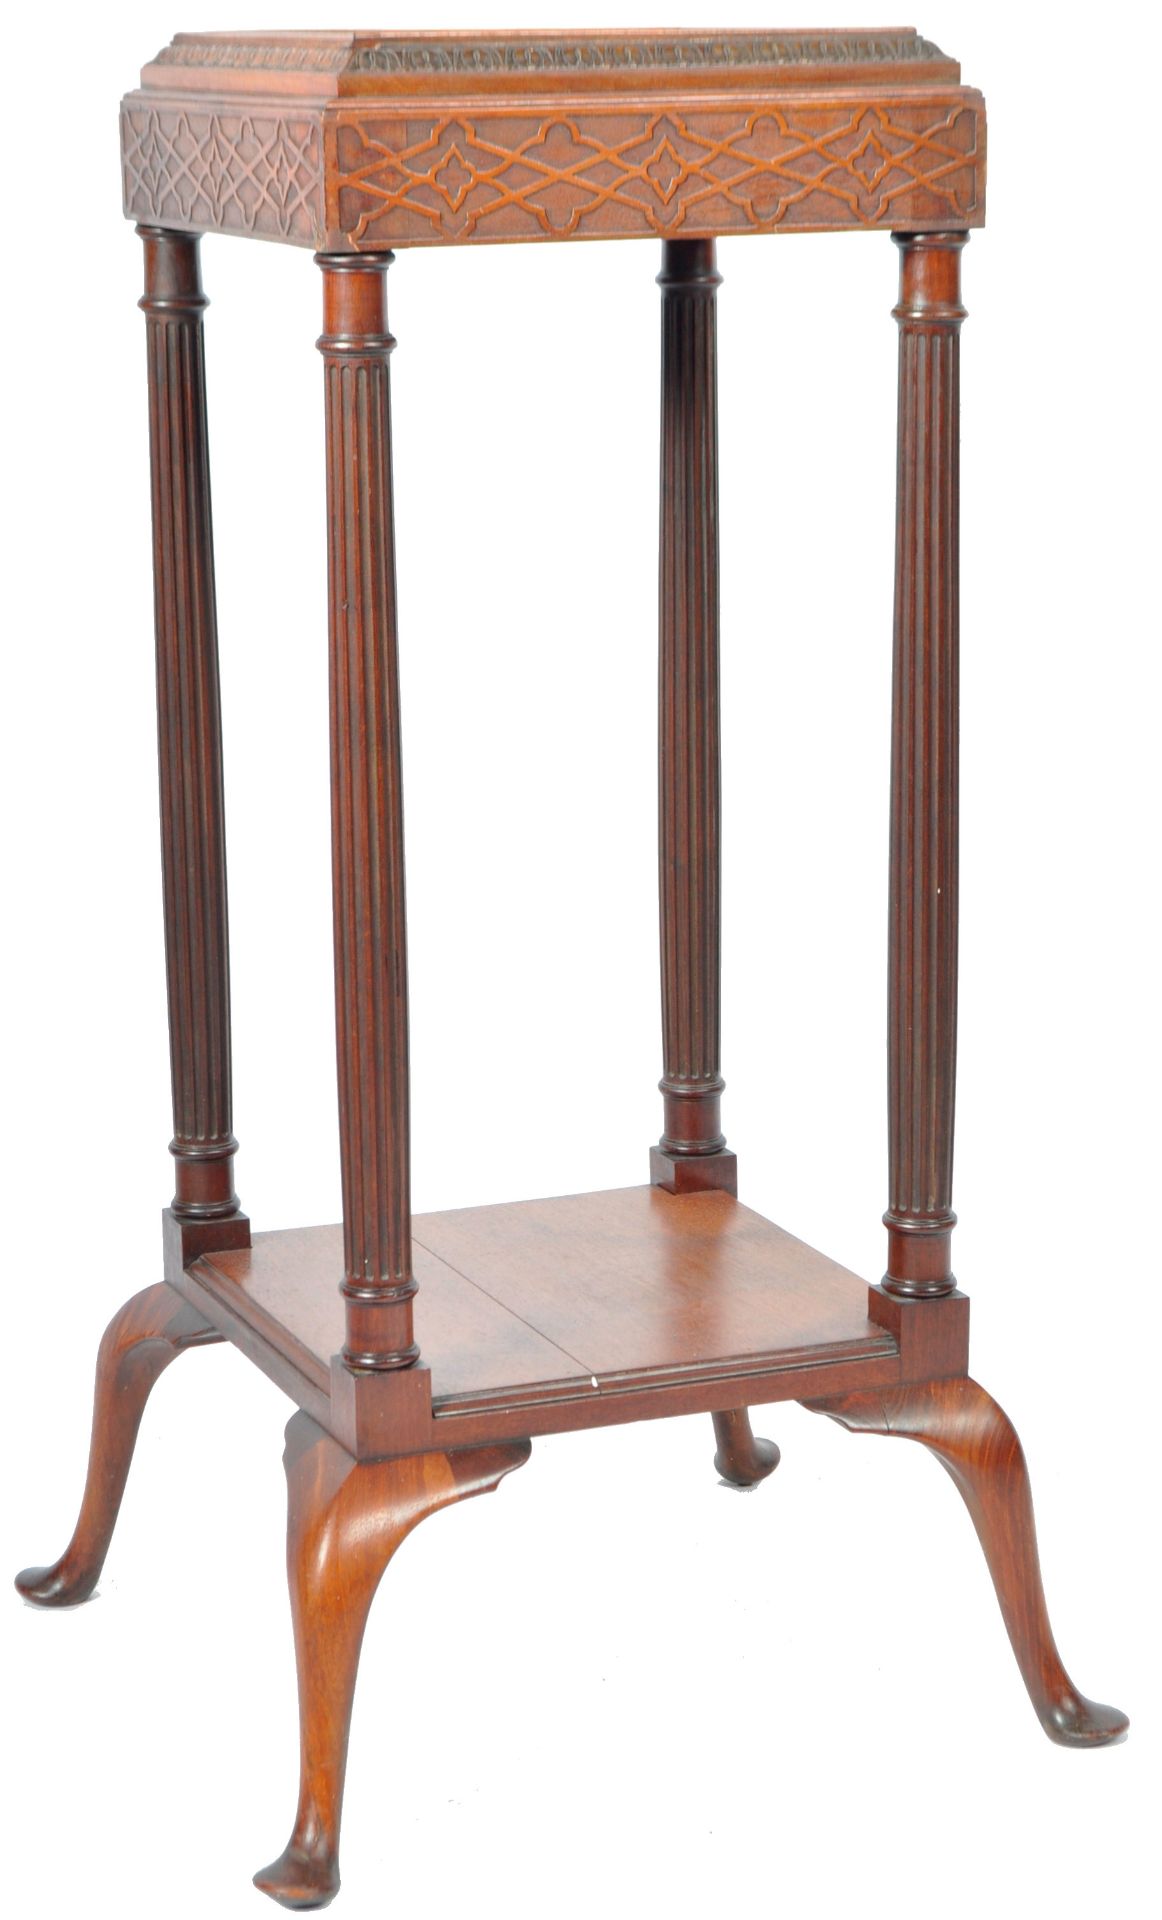 ANTIQUE 19TH CENTURY MAHOGANY BUST STAND - Image 2 of 7